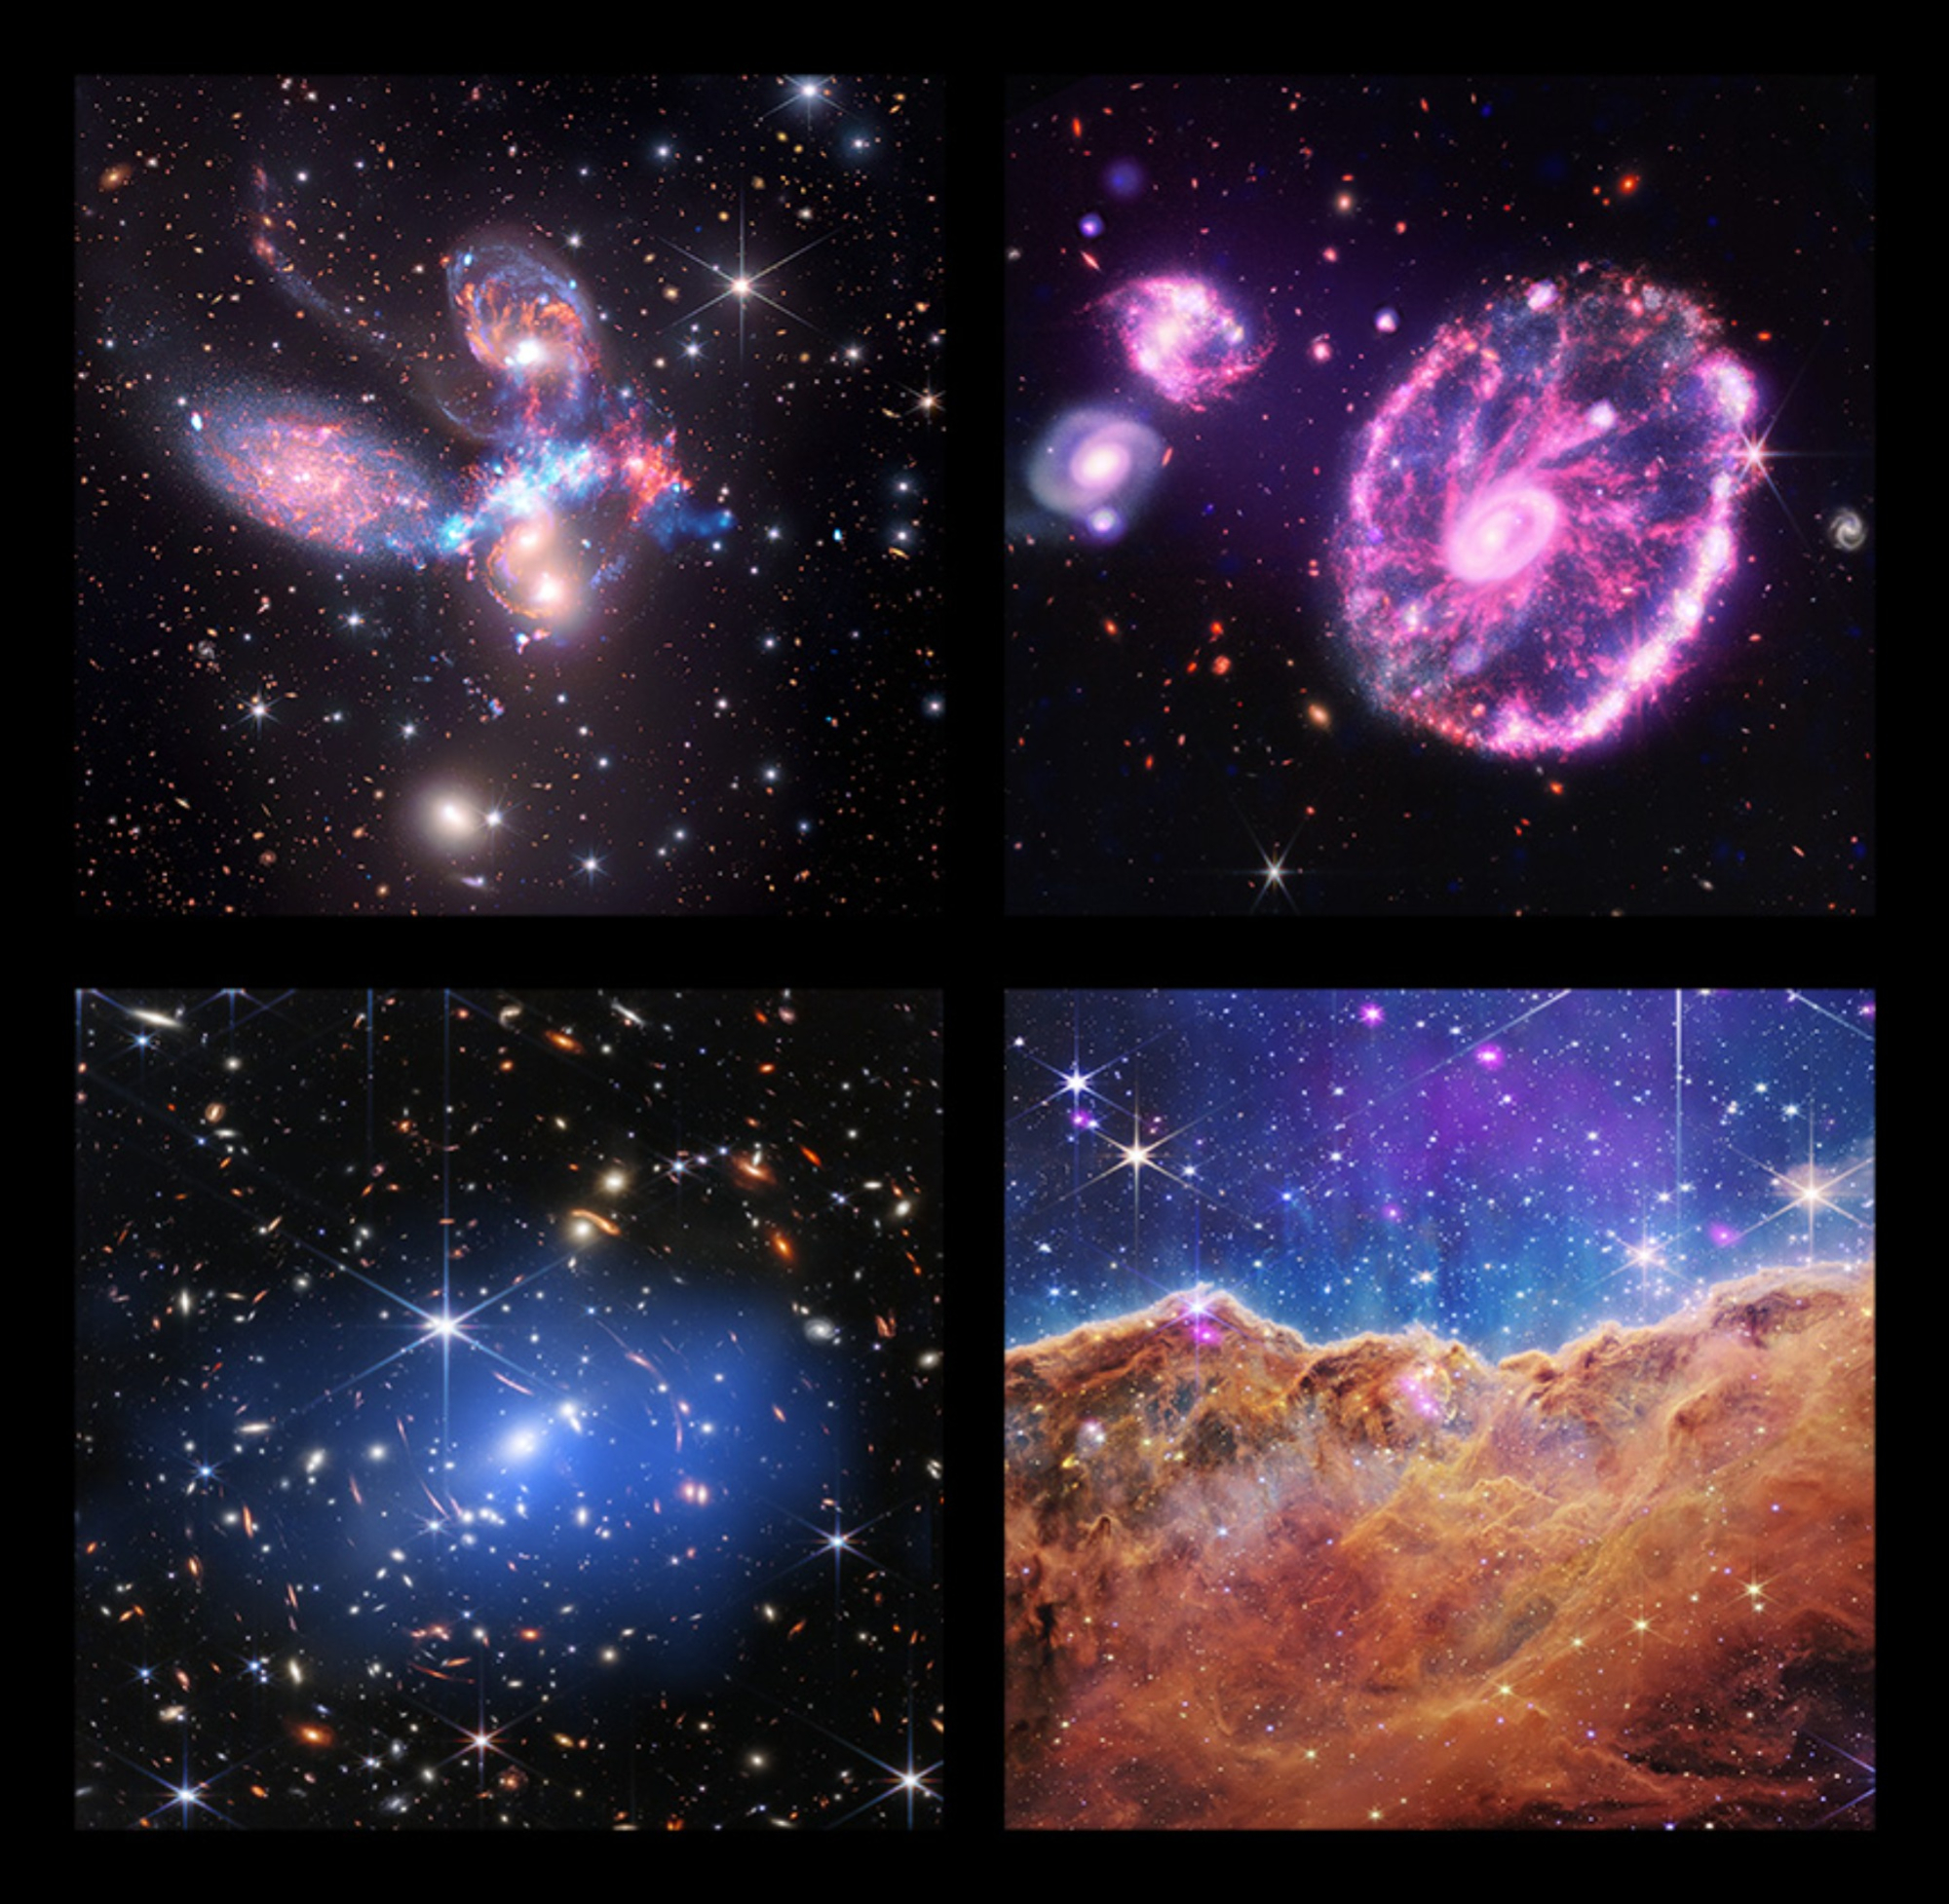 Four new composite images from JWST and x-rays from the Chandra observatory.